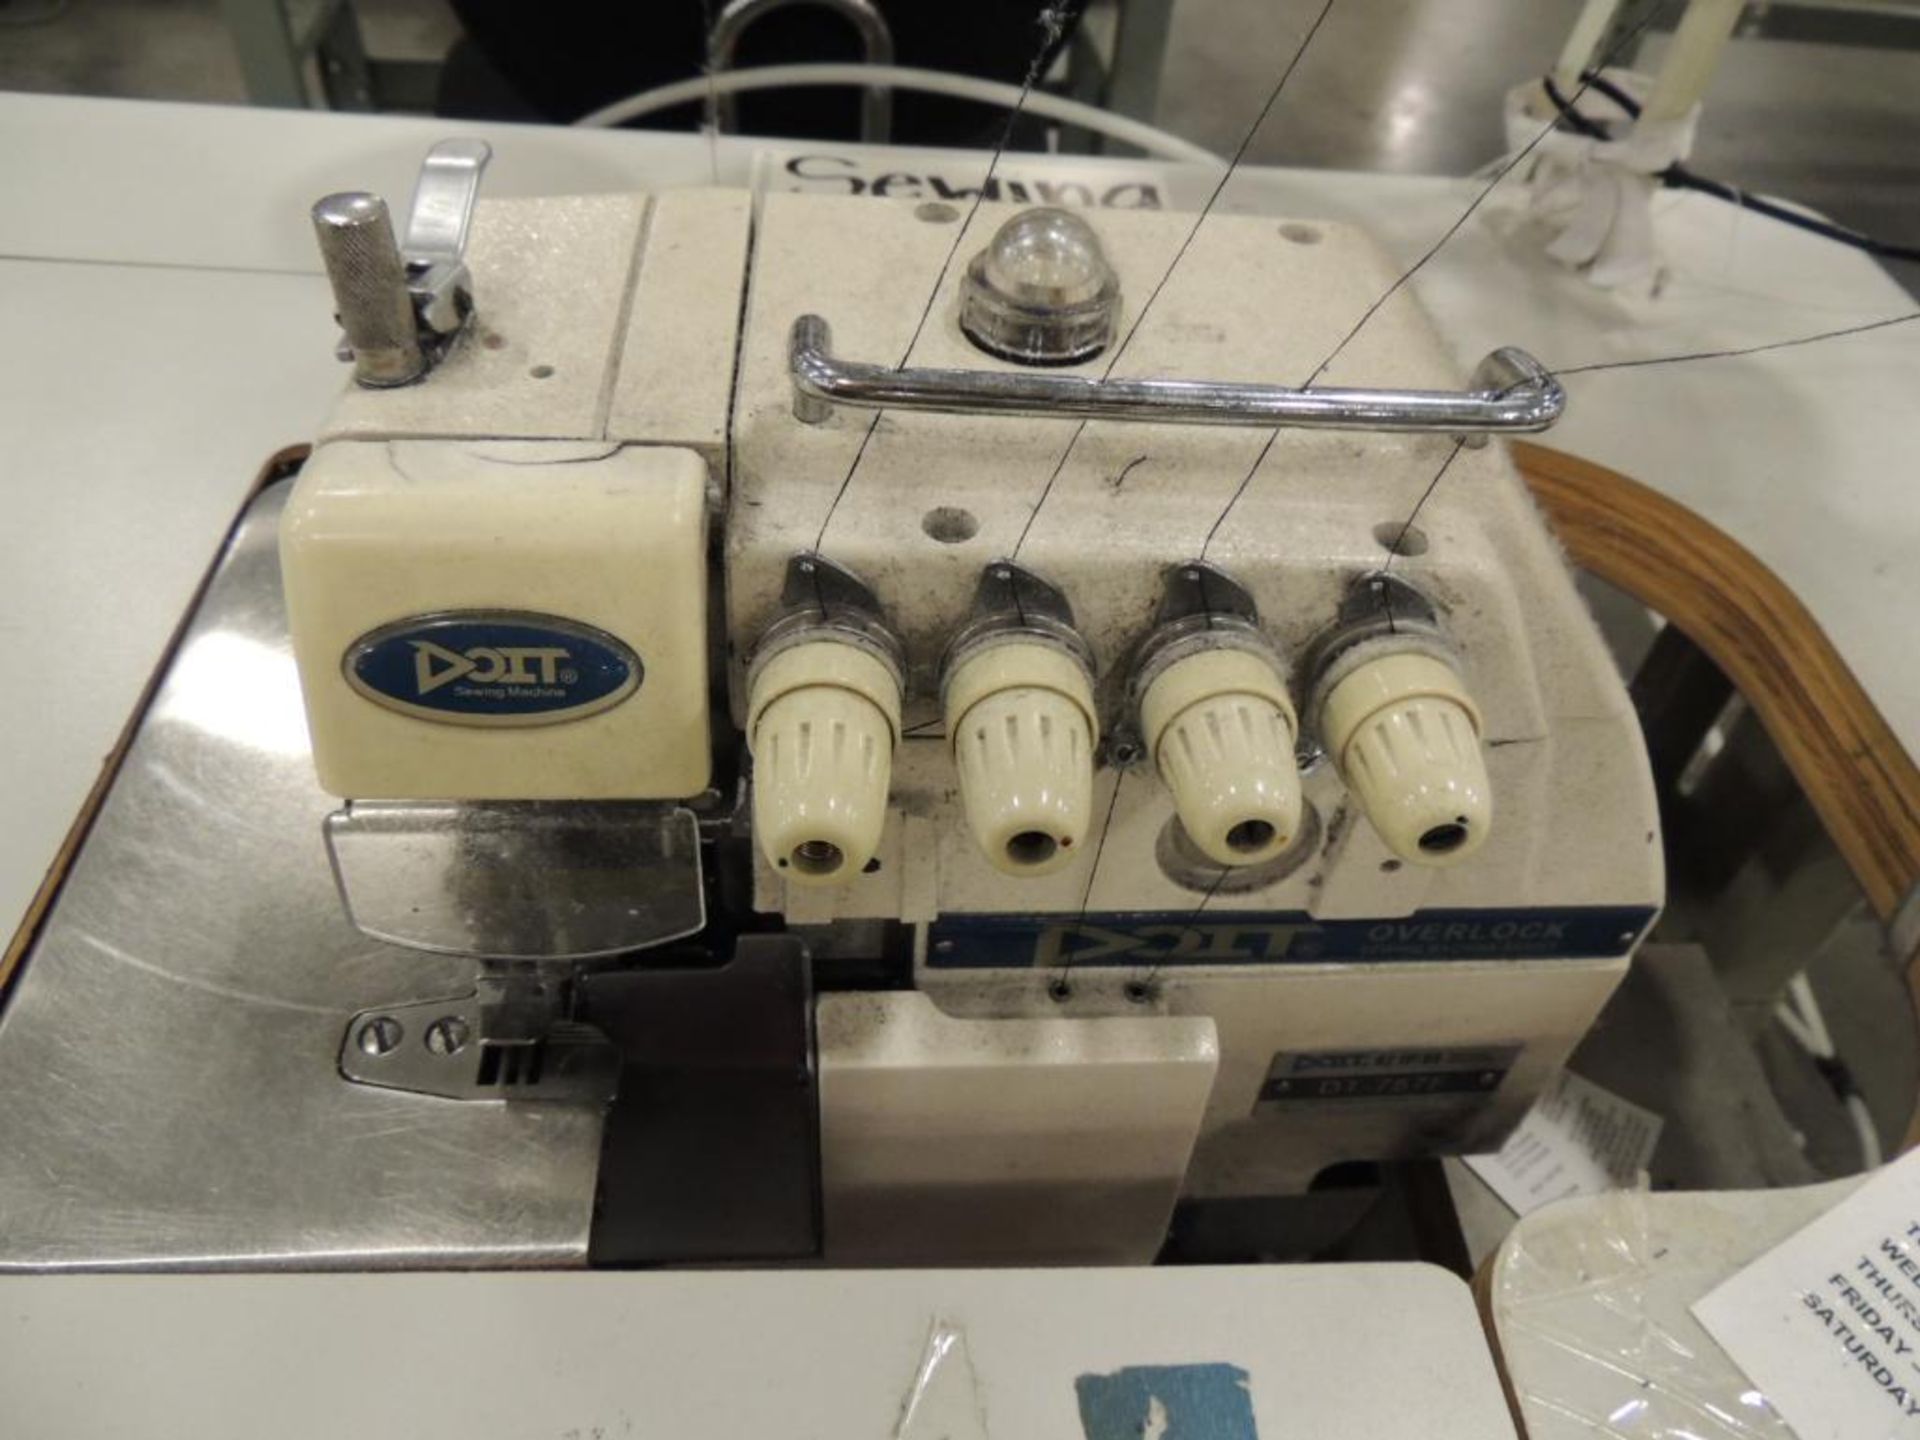 Doit DT 757F 5-Thread Flatbed Super High Speed Industrial Overlock Sewing Machine, on Table